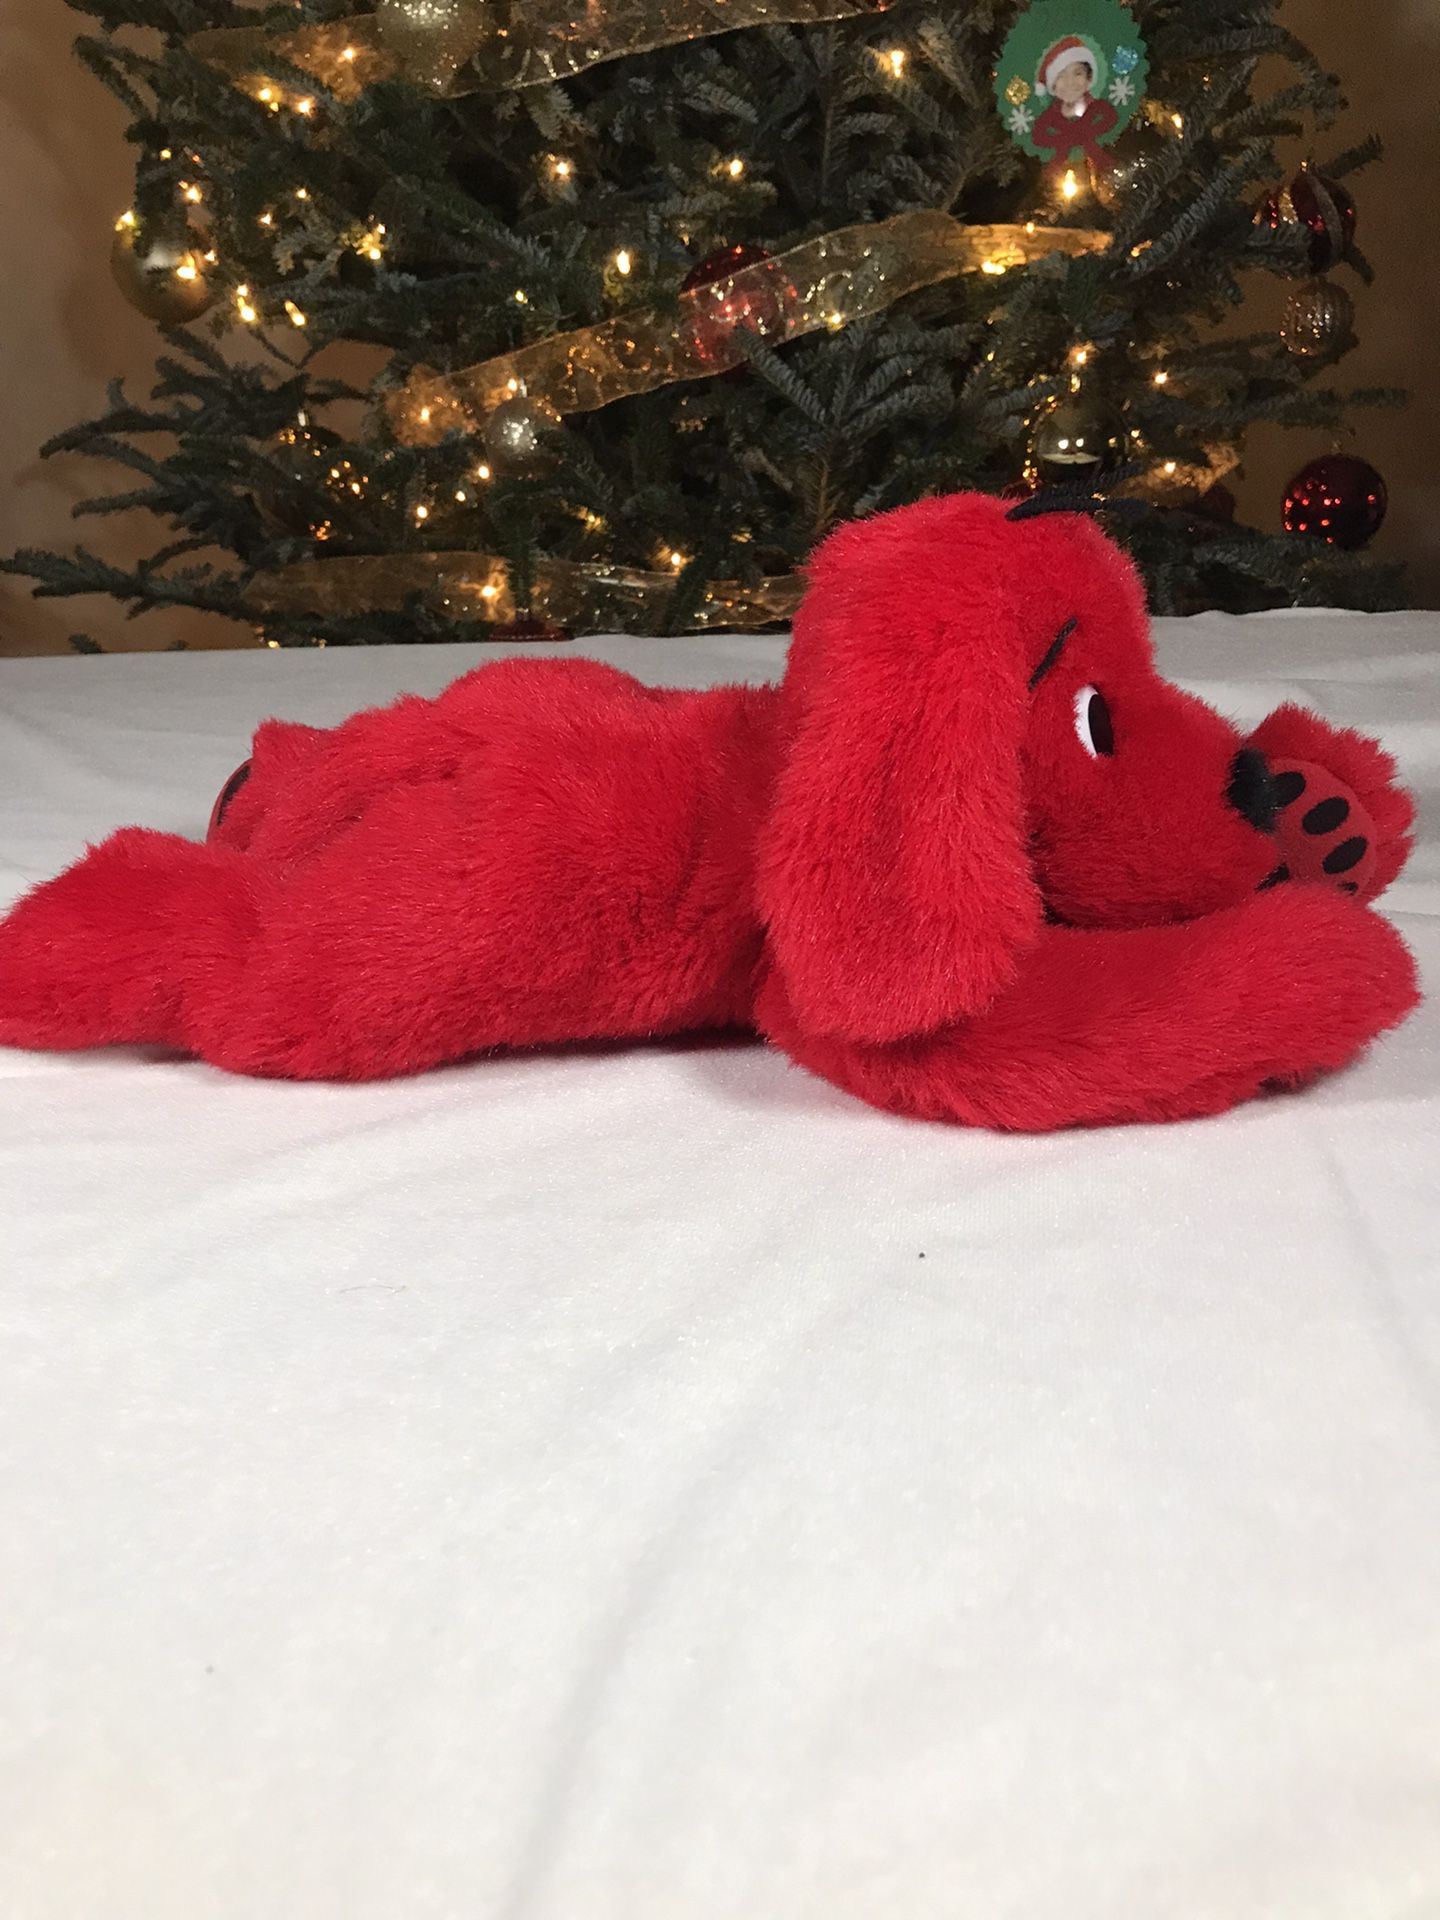 CLIFFORD THE BIG RED DOG LARGE FLOPPY PLUSH STUFFED ANIMAL LYING 1997 SCHOLASTIC Previous  Clifford the big red dog large floppy plush stuffed animal 